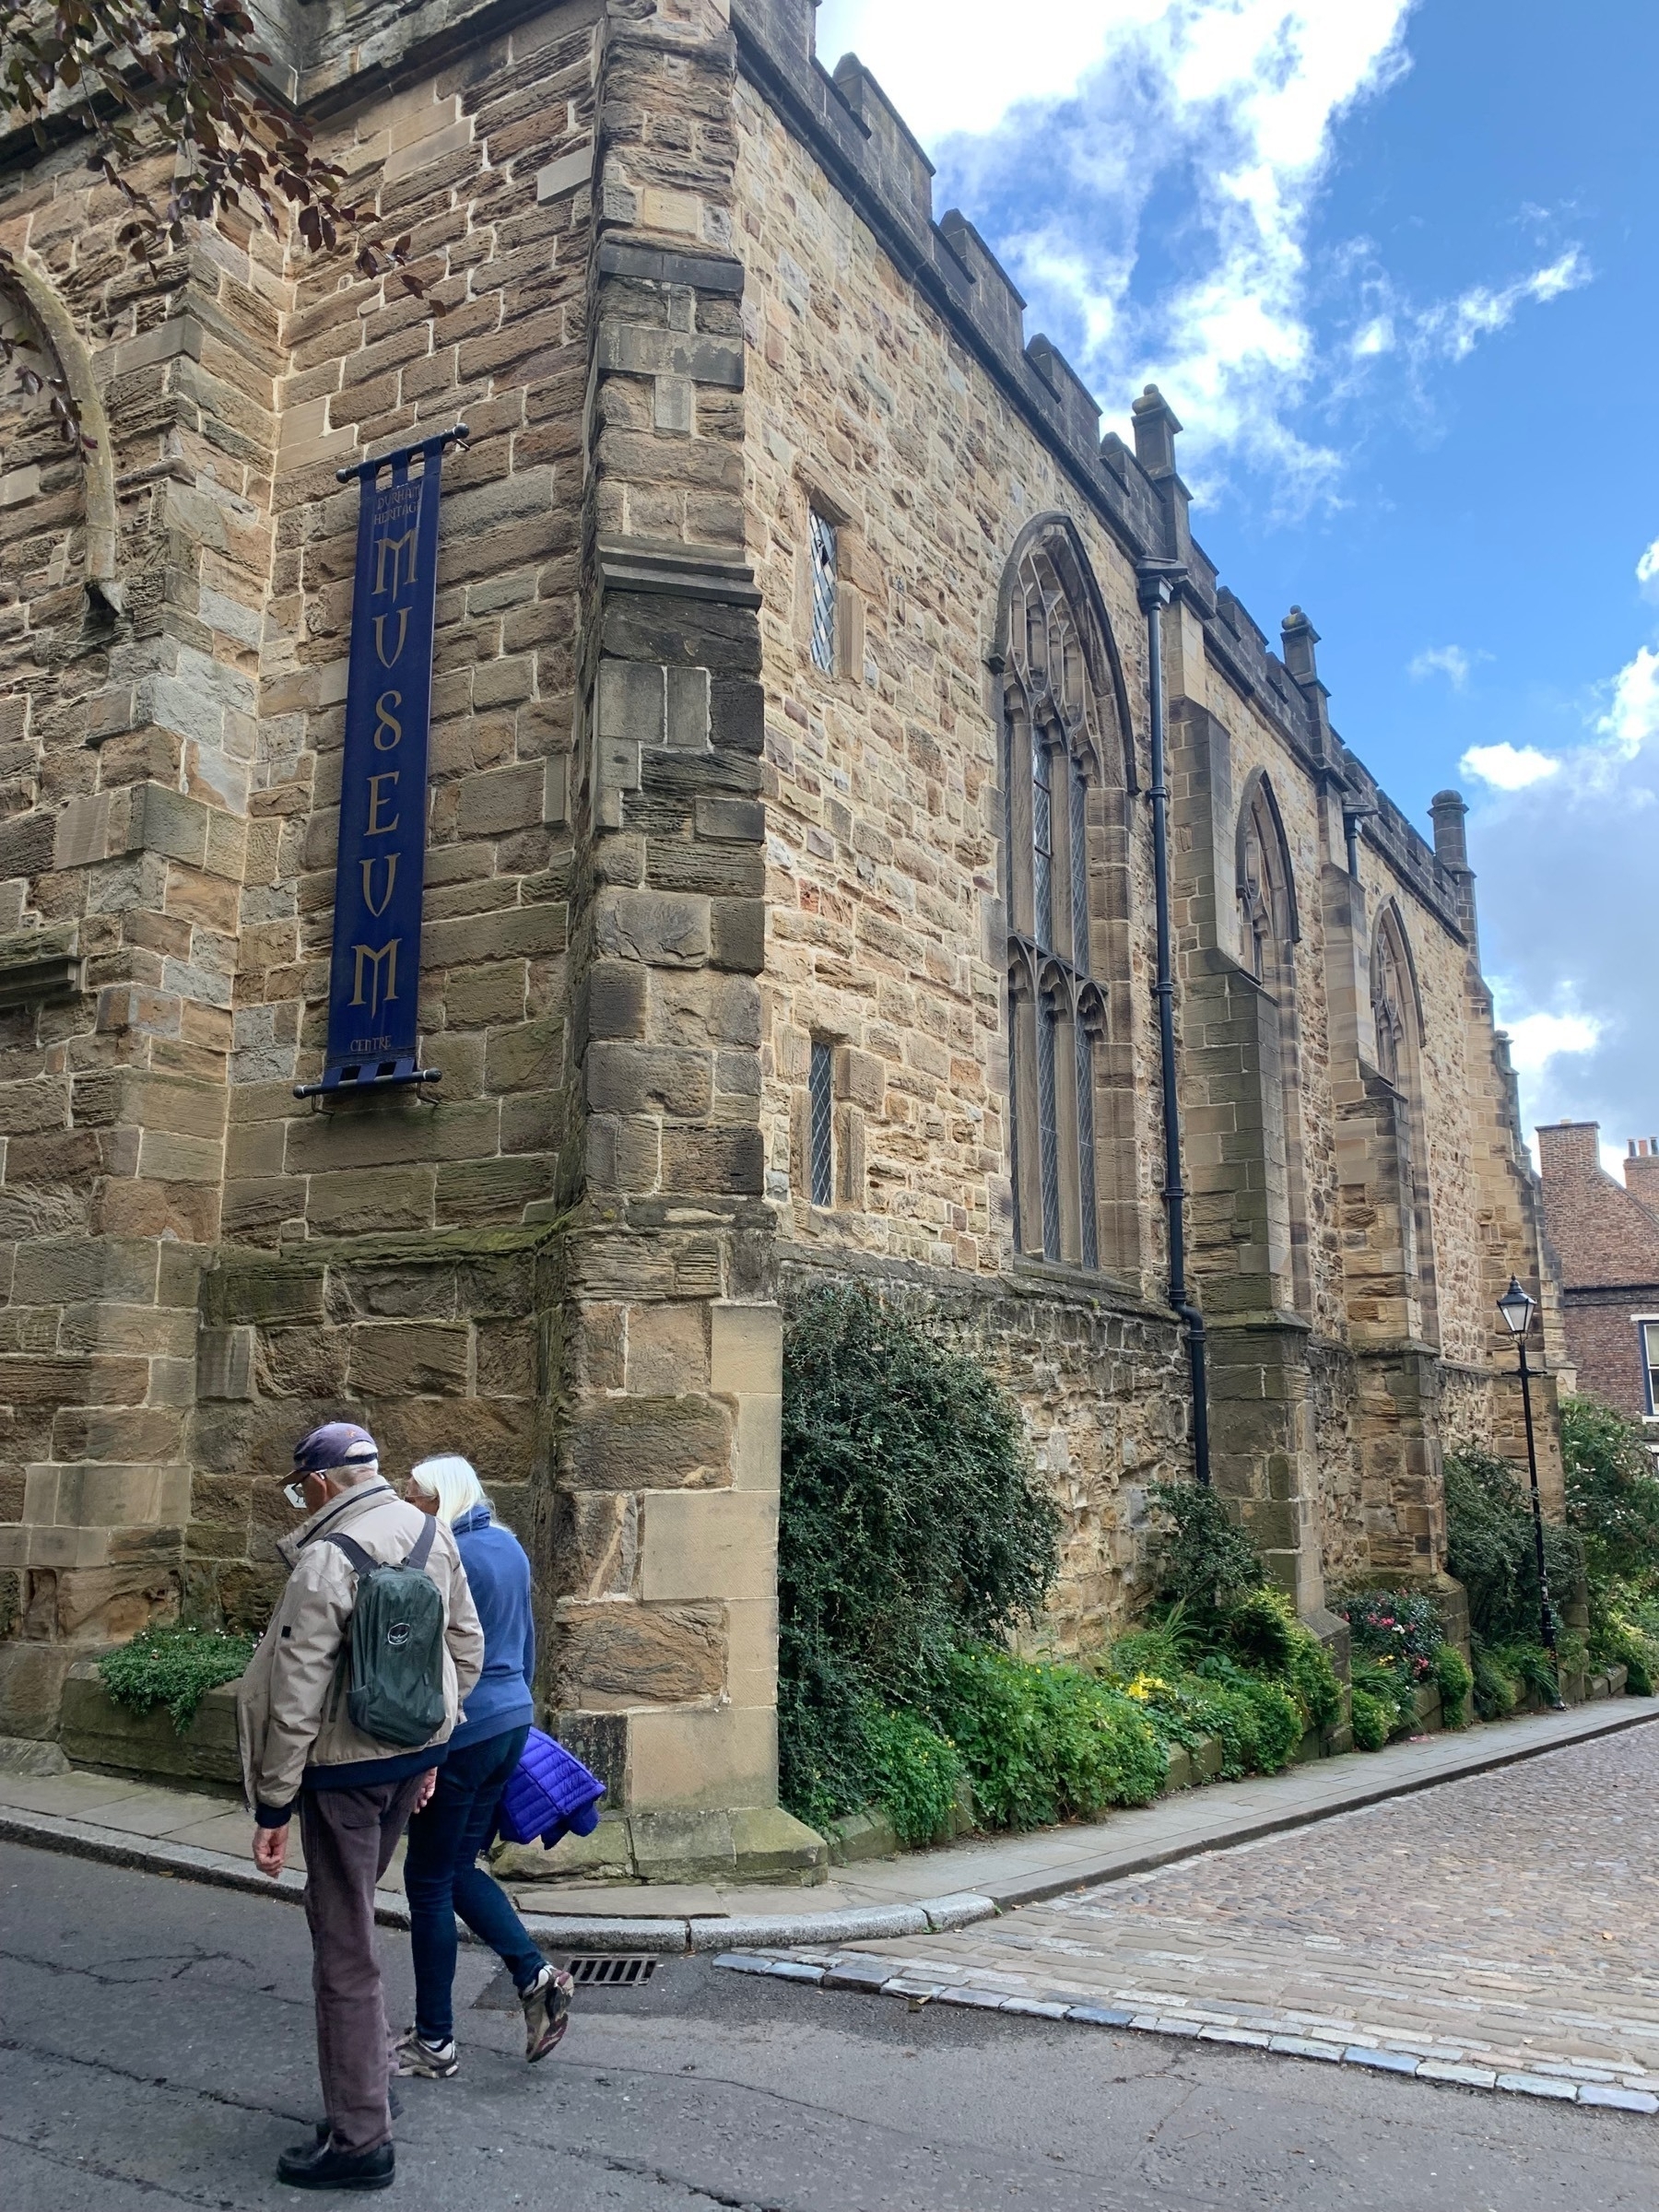 Two people walking in the road in front of an old church building now a museum.